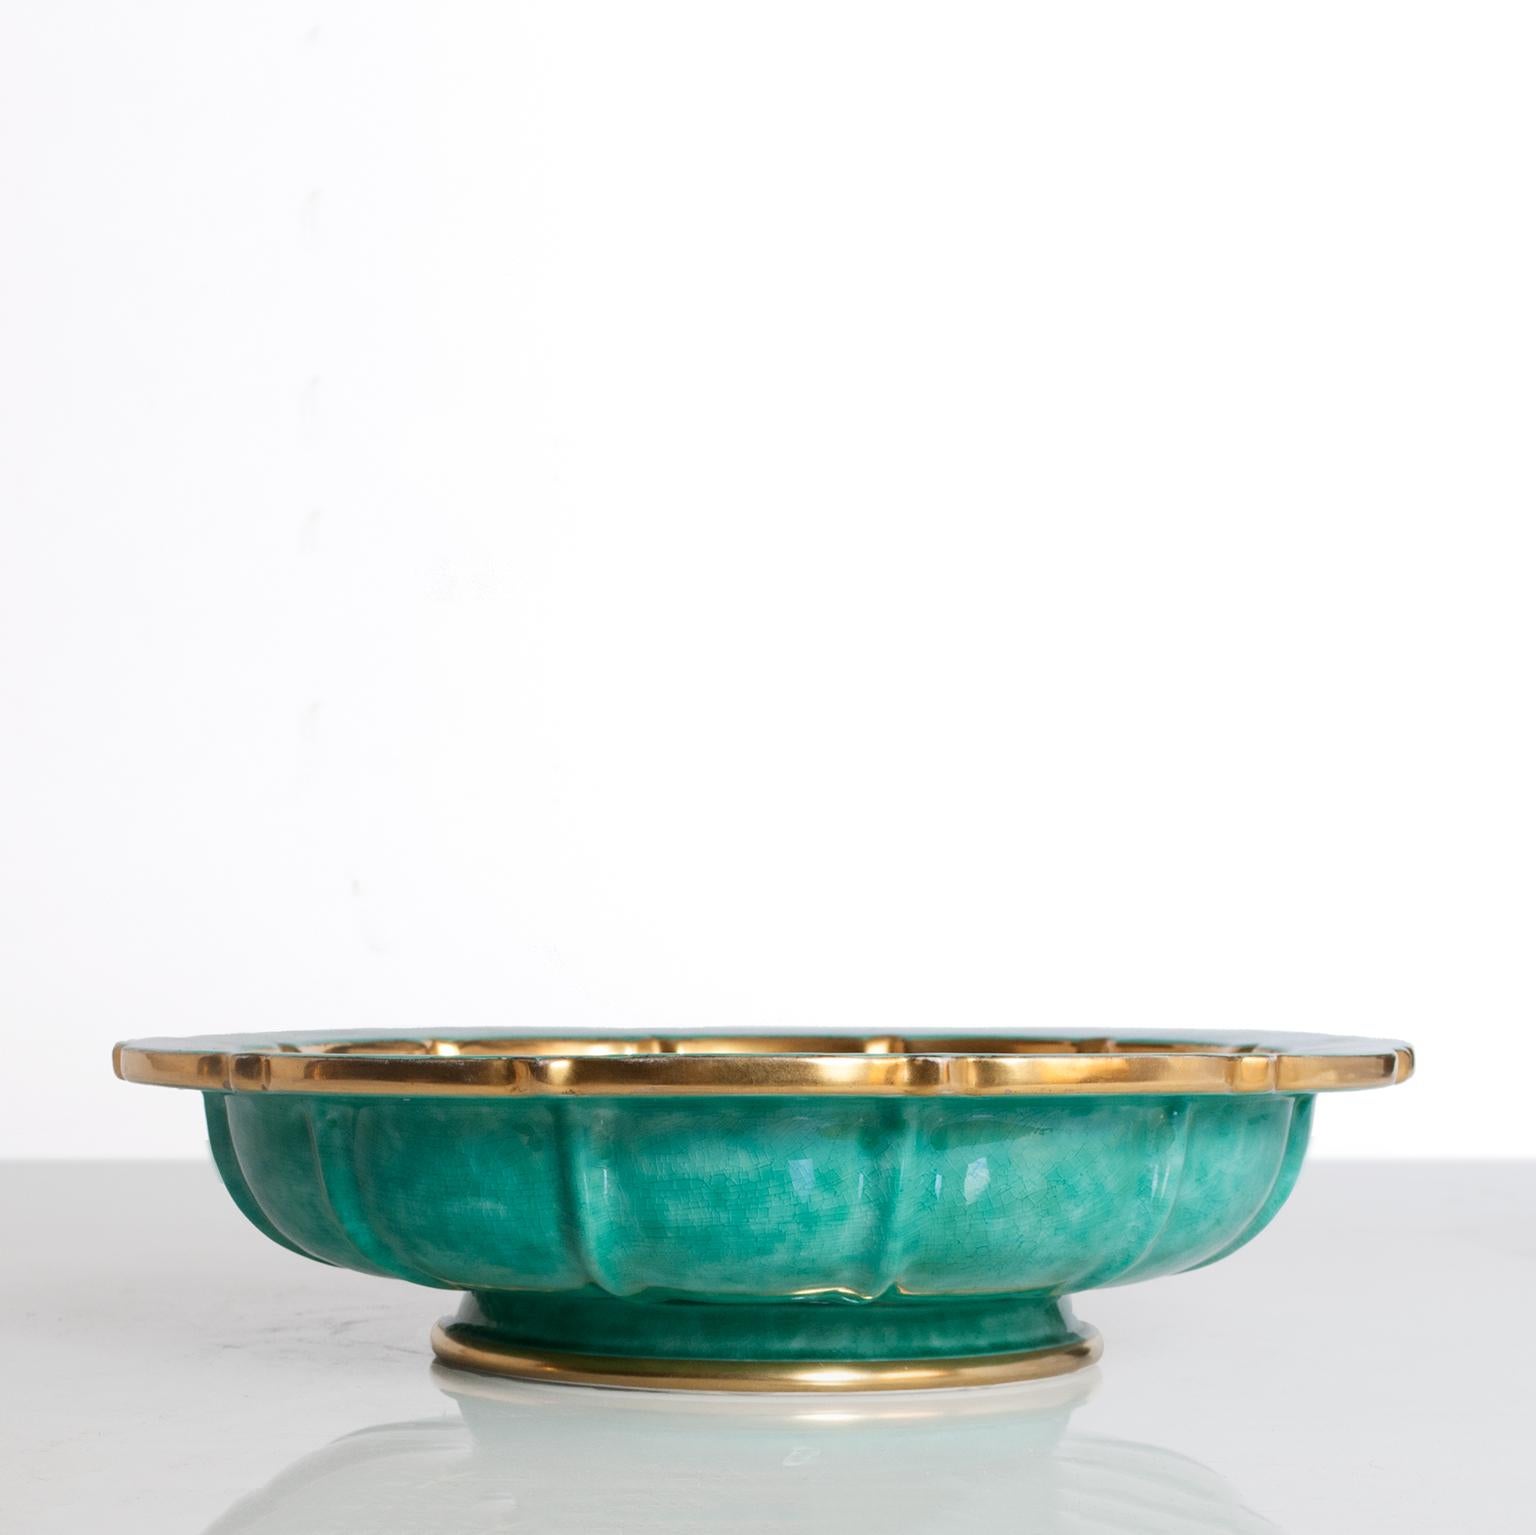 20th Century Scandinavian Modern Bowl by Wilhelm Kage for Gustavsberg Gold and Green